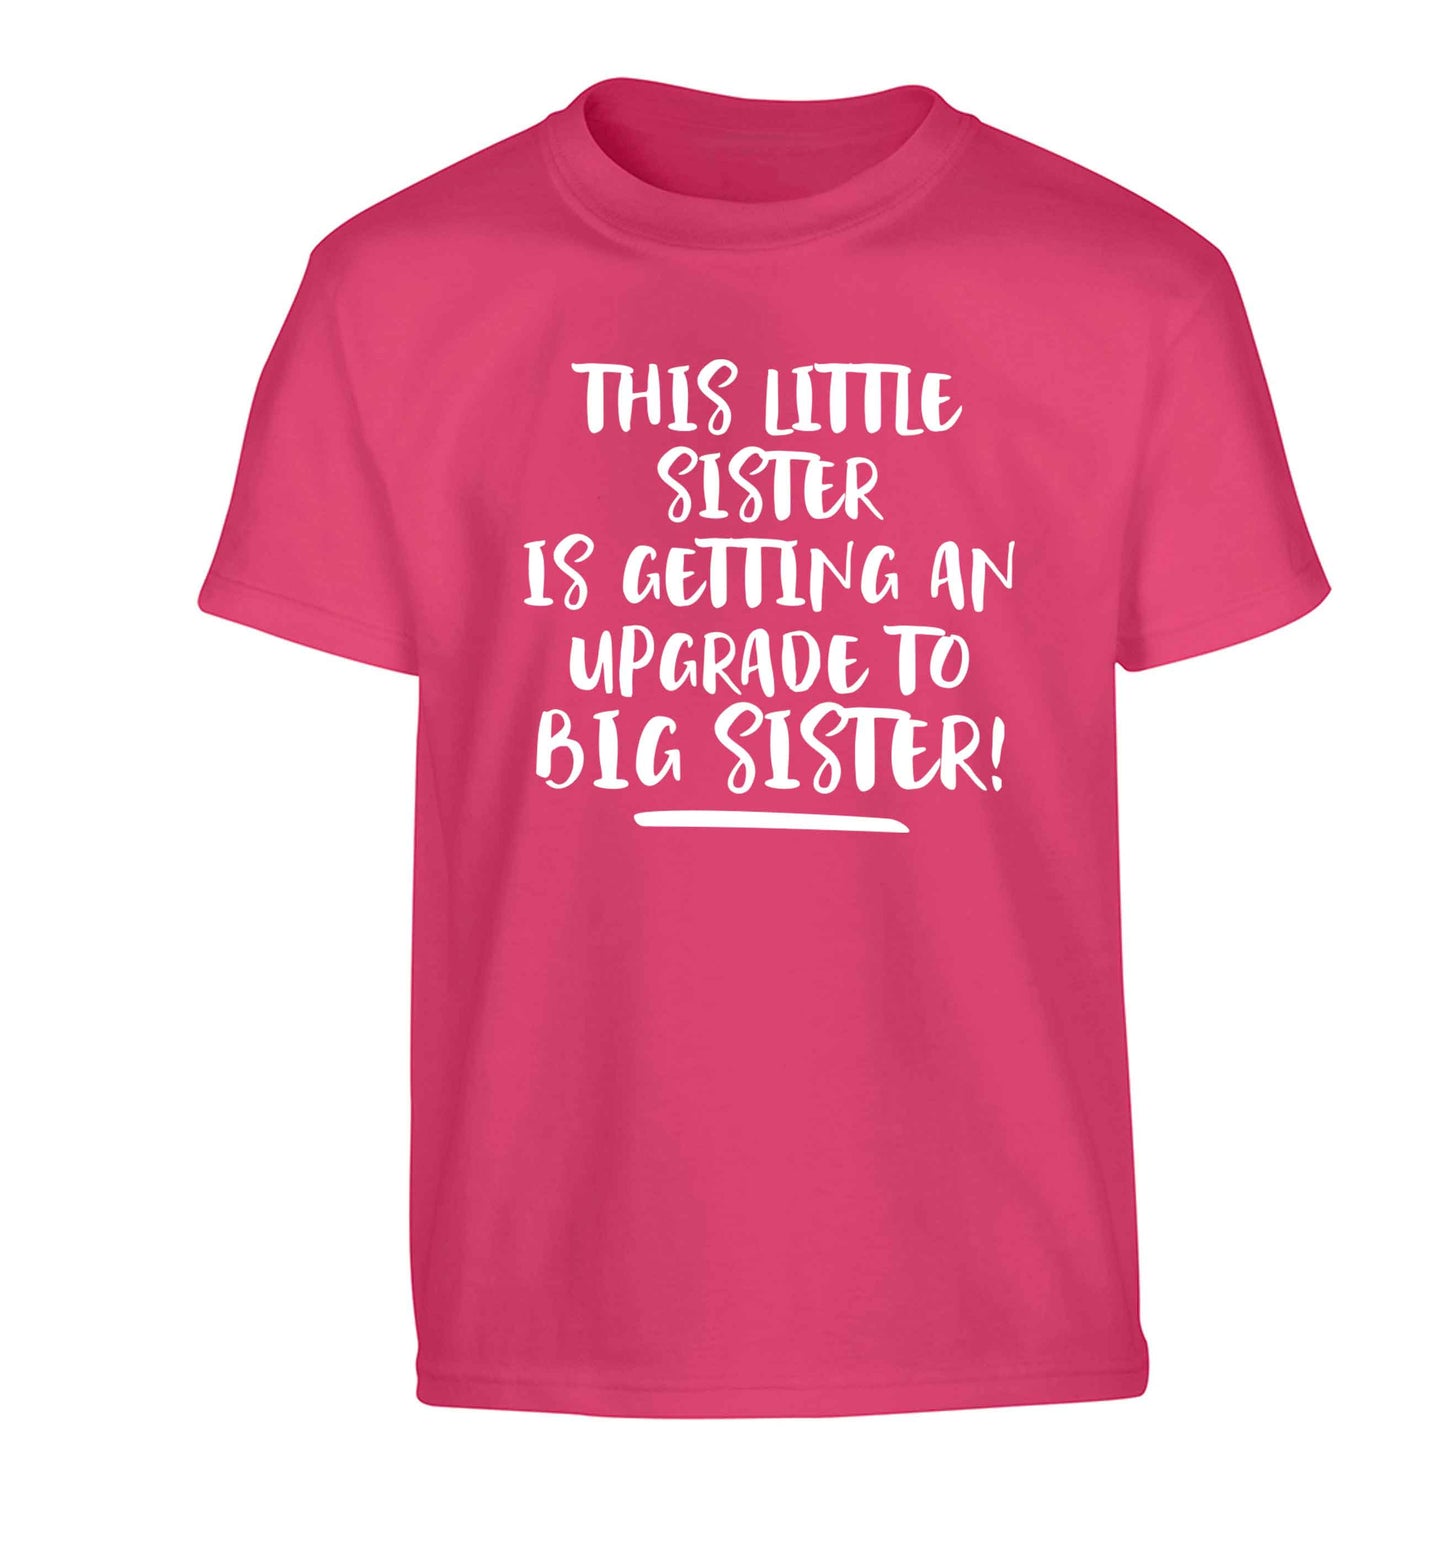 This little sister is getting an upgrade to big sister! Children's pink Tshirt 12-13 Years